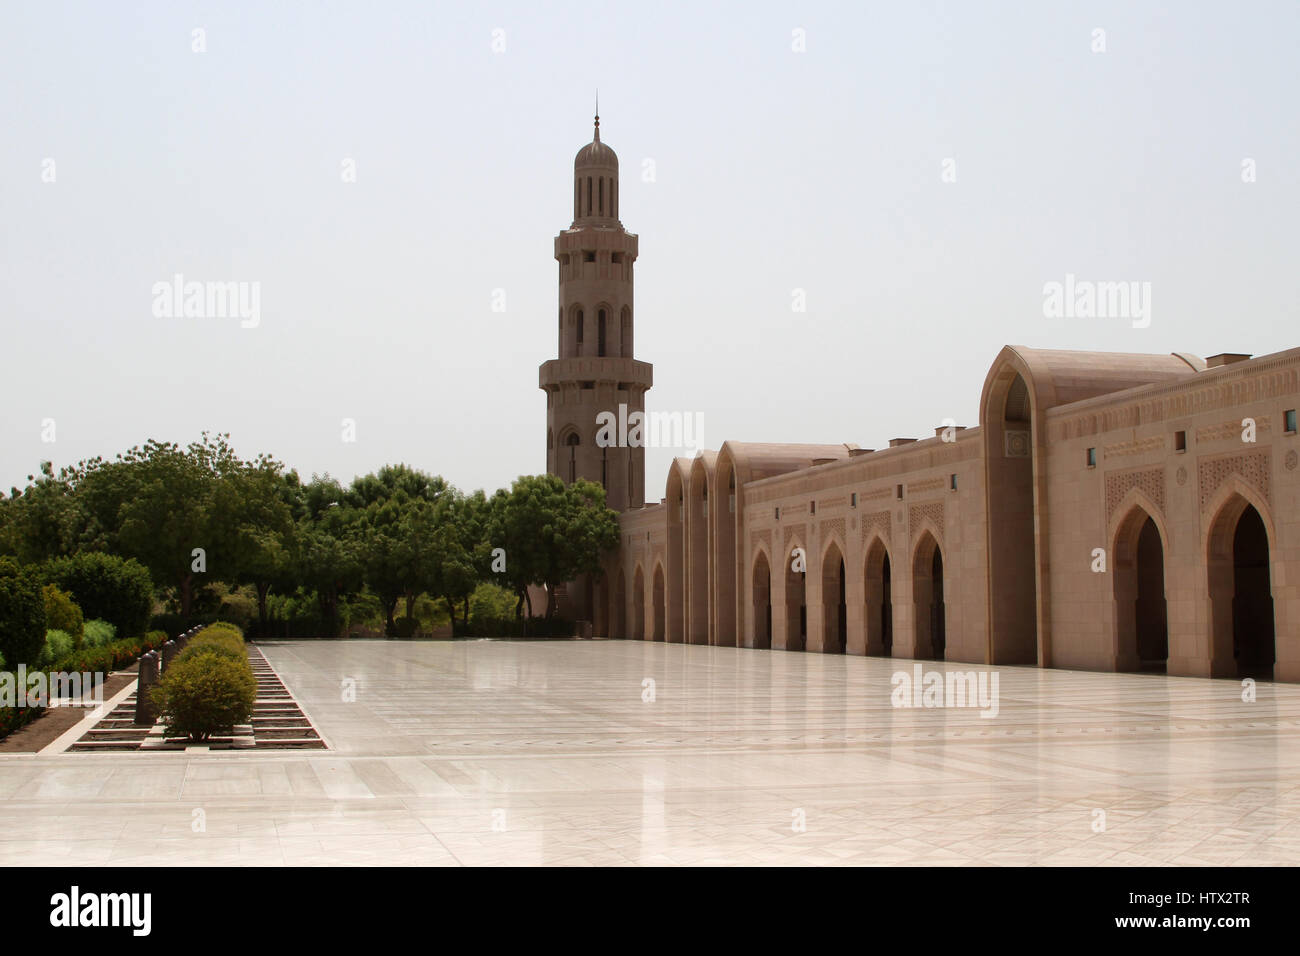 The Sultan Qaboos Grand Mosque in Muscat, Oman Stock Photo